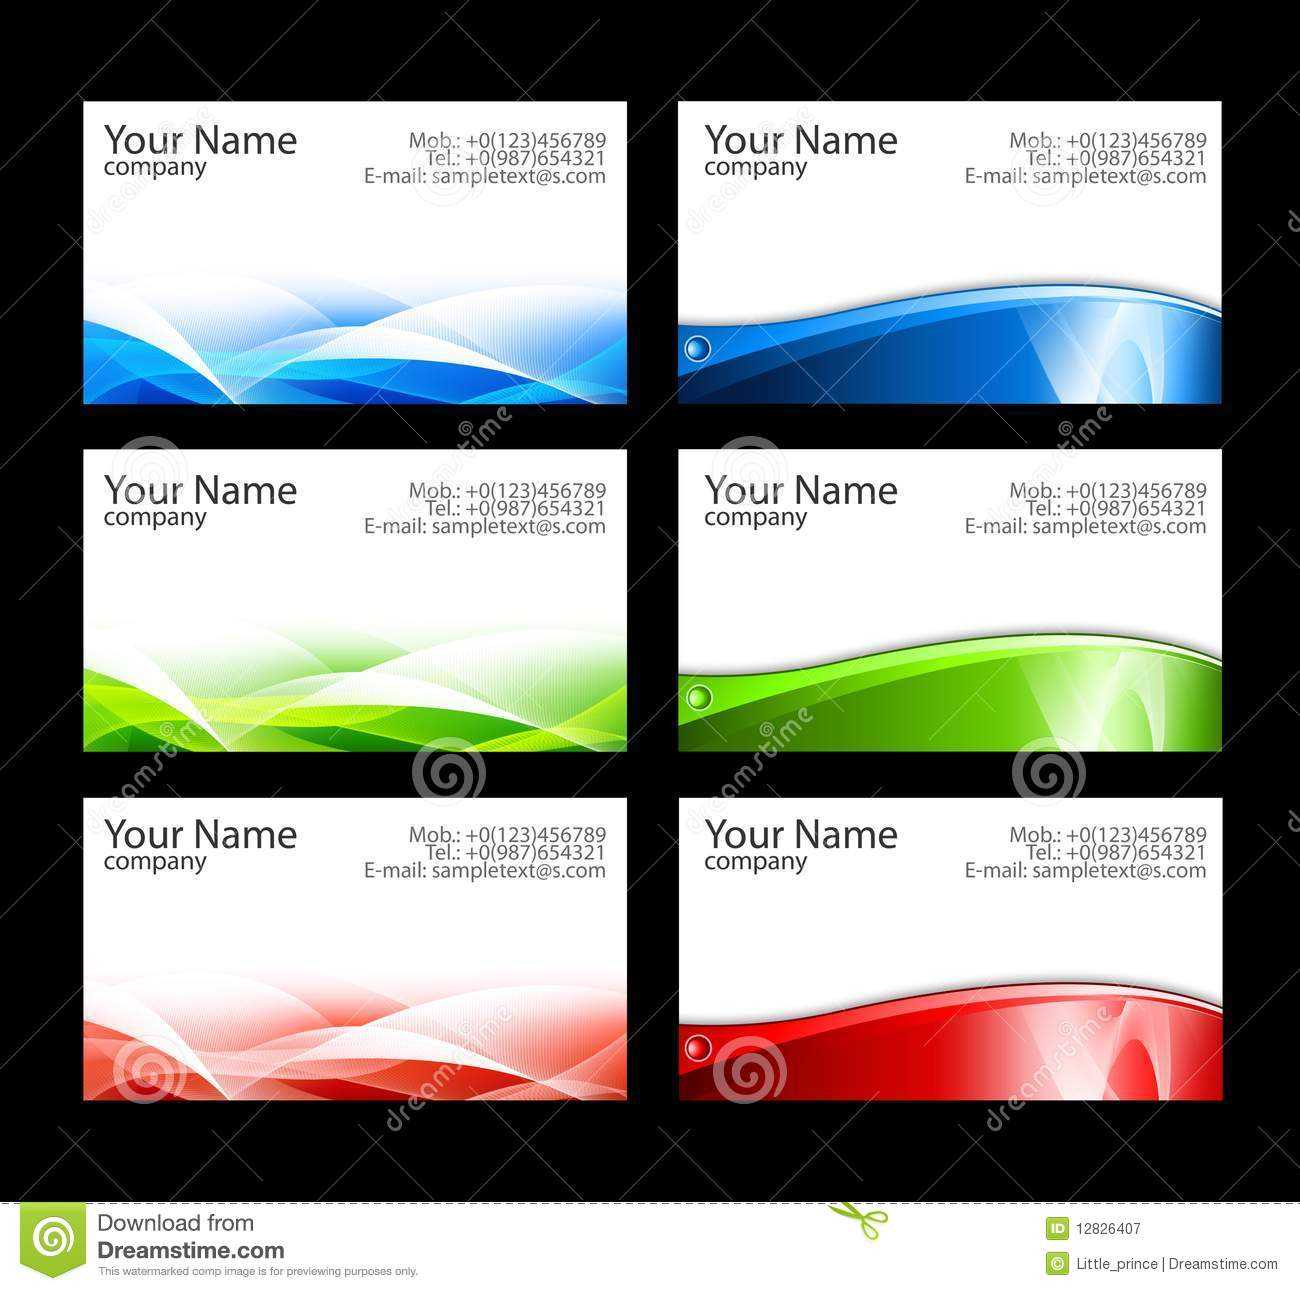 15 Free Avery Business Card Templates Images – Free Business Inside Free Business Cards Templates For Word